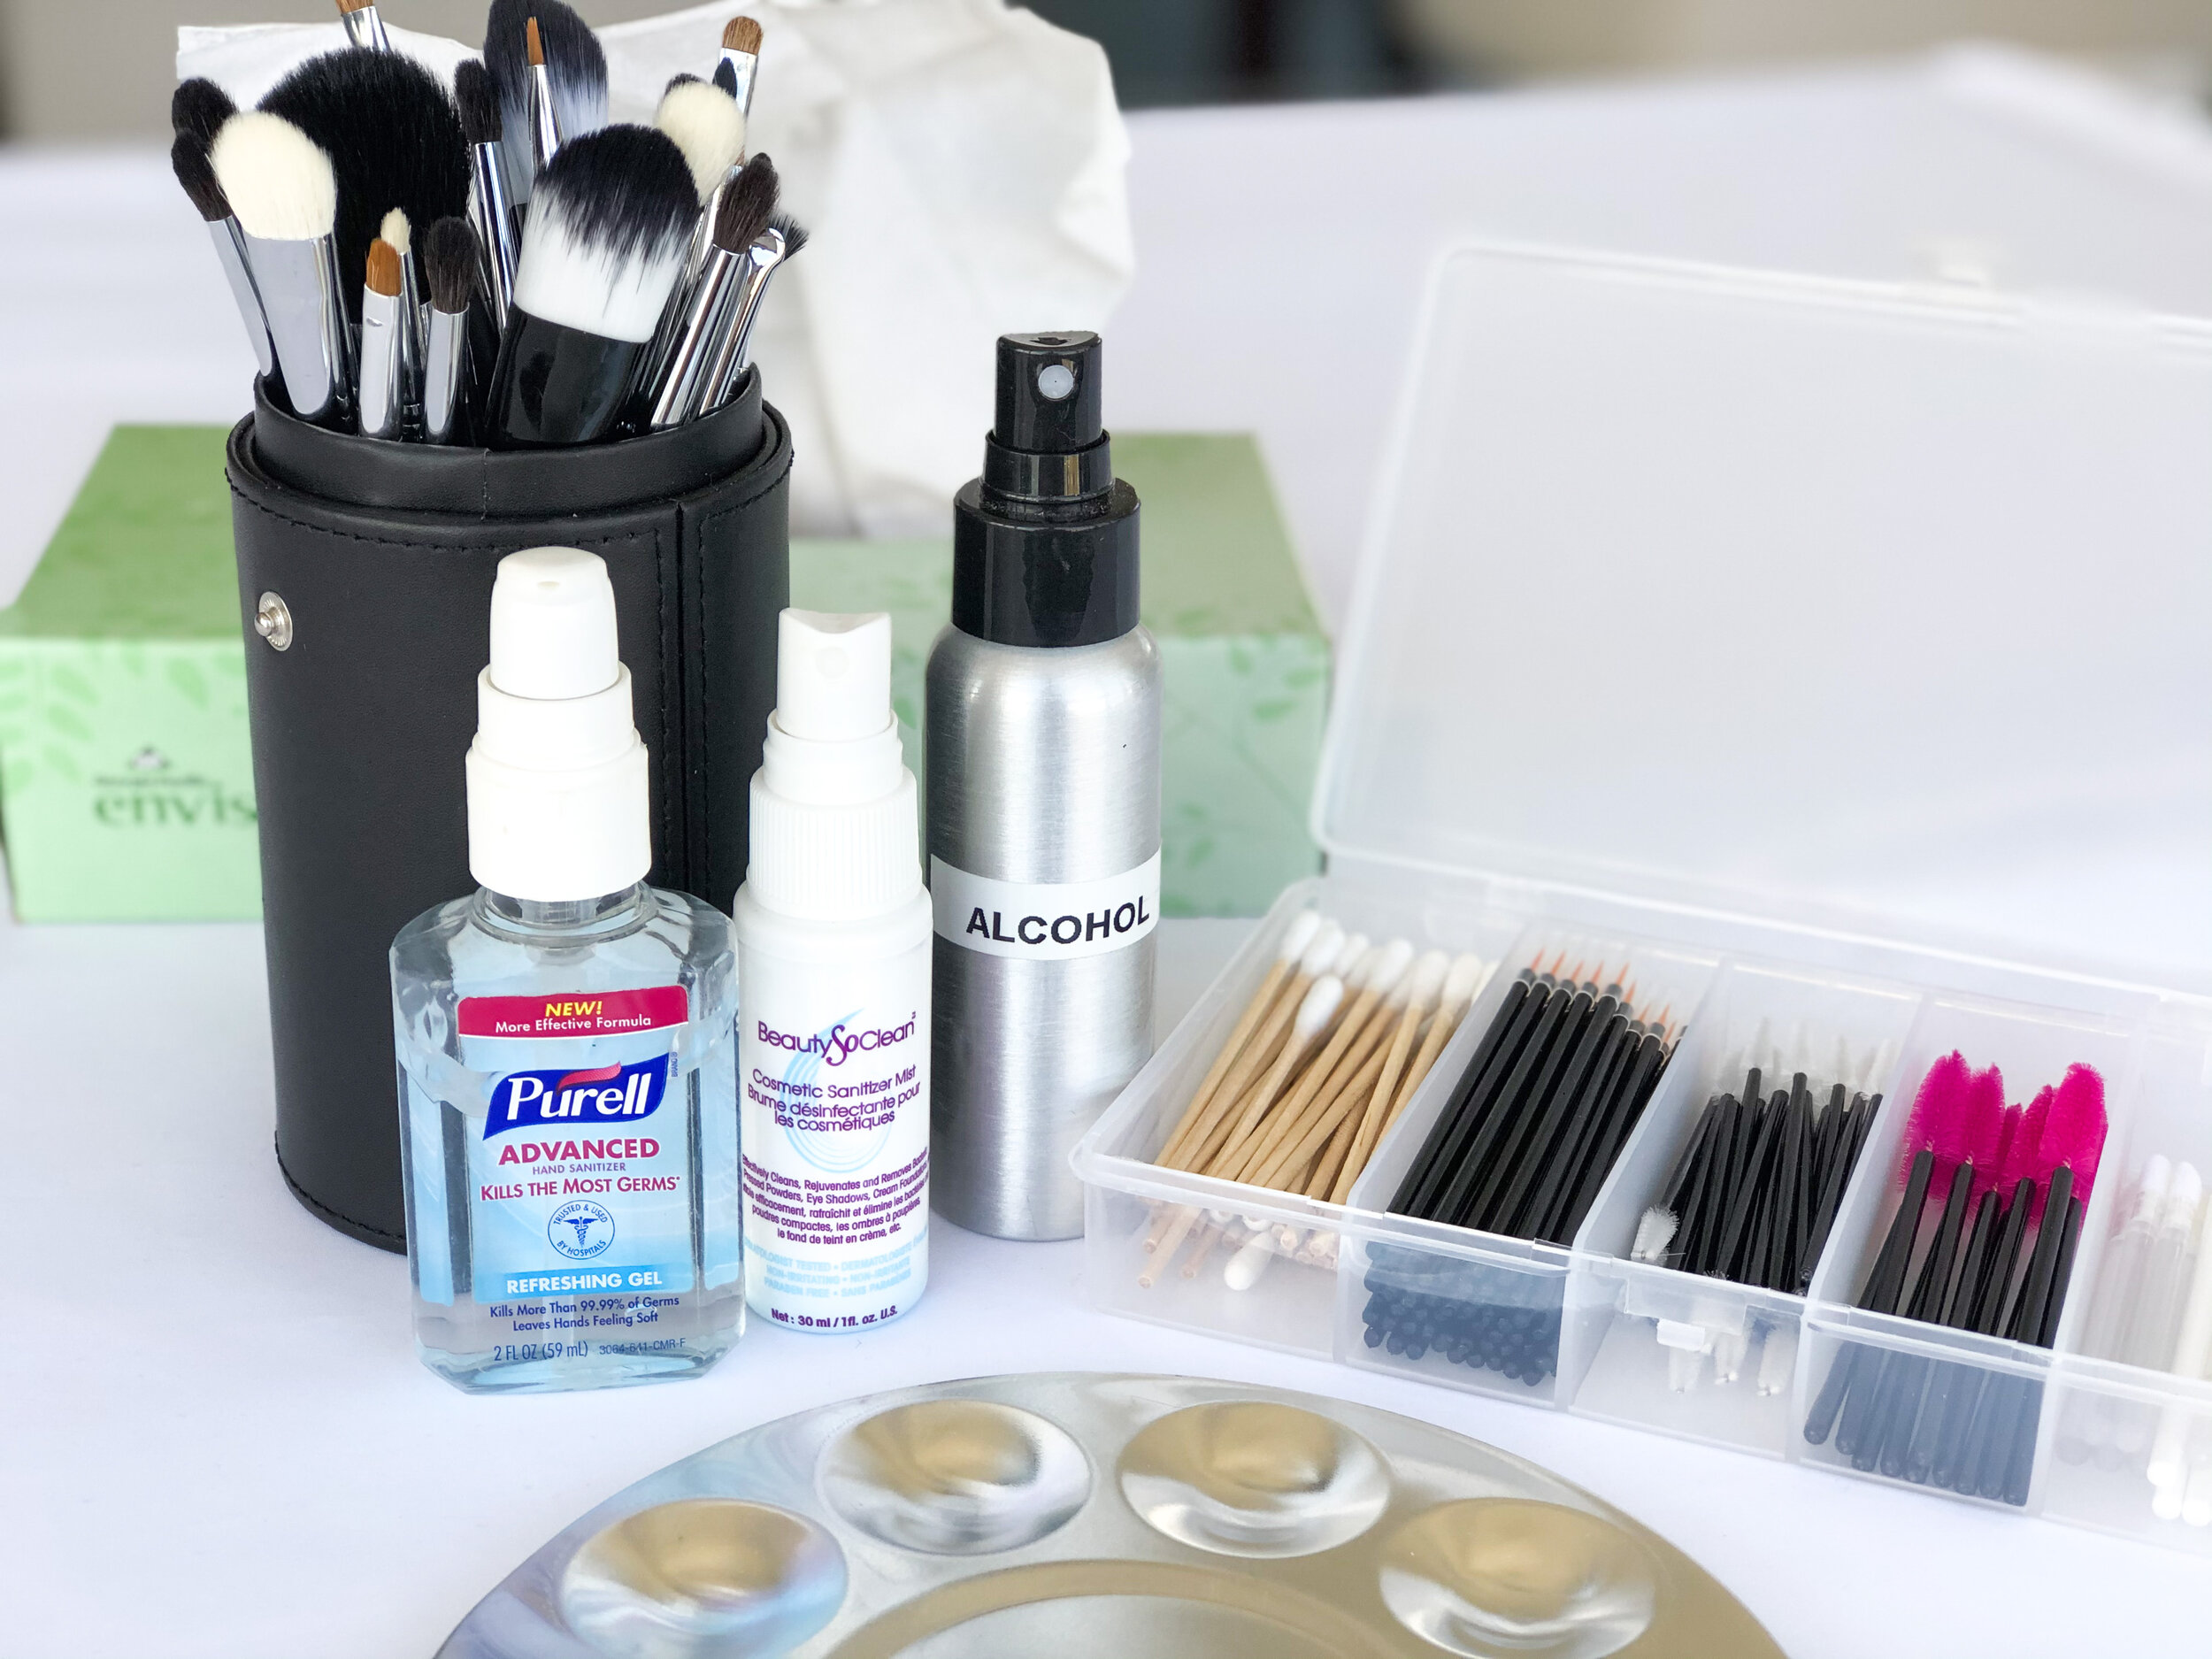 How Pro Makeup Artists Clean Their Makeup Brushes When Working